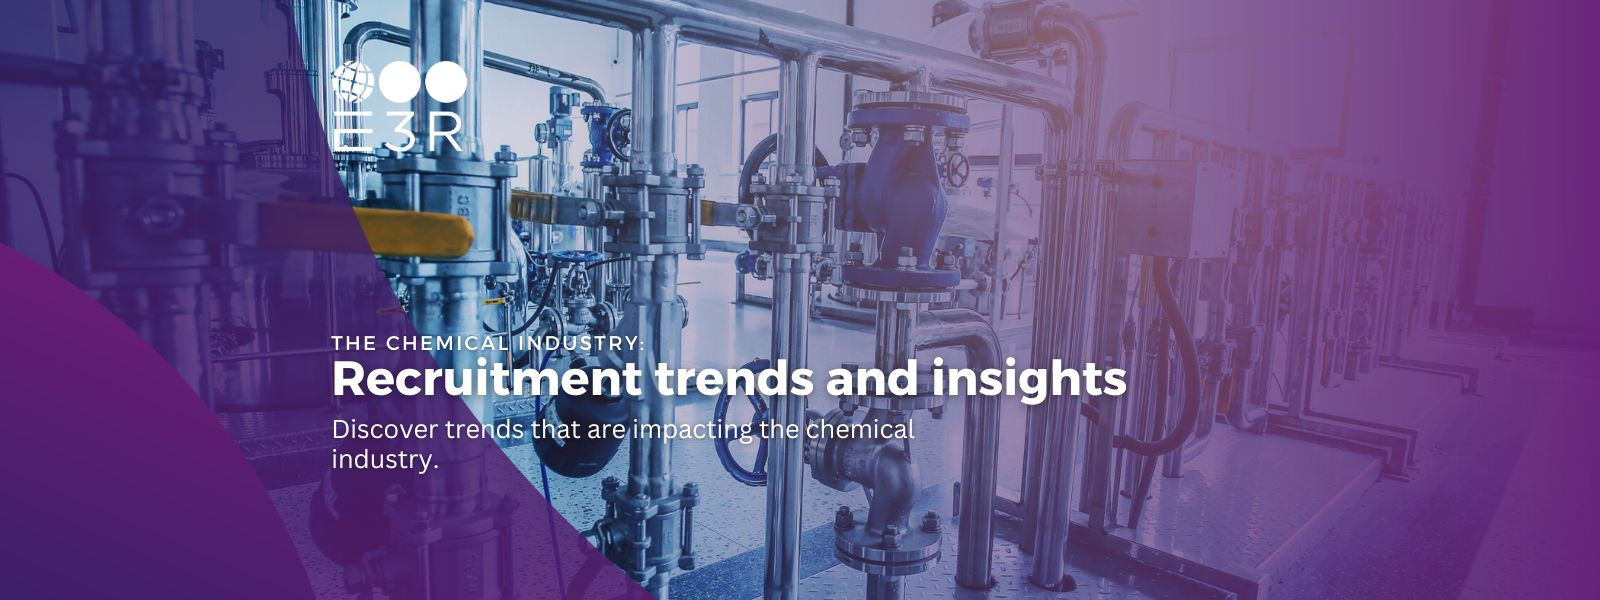 The Chemical Industry: Recruitment trends and insights